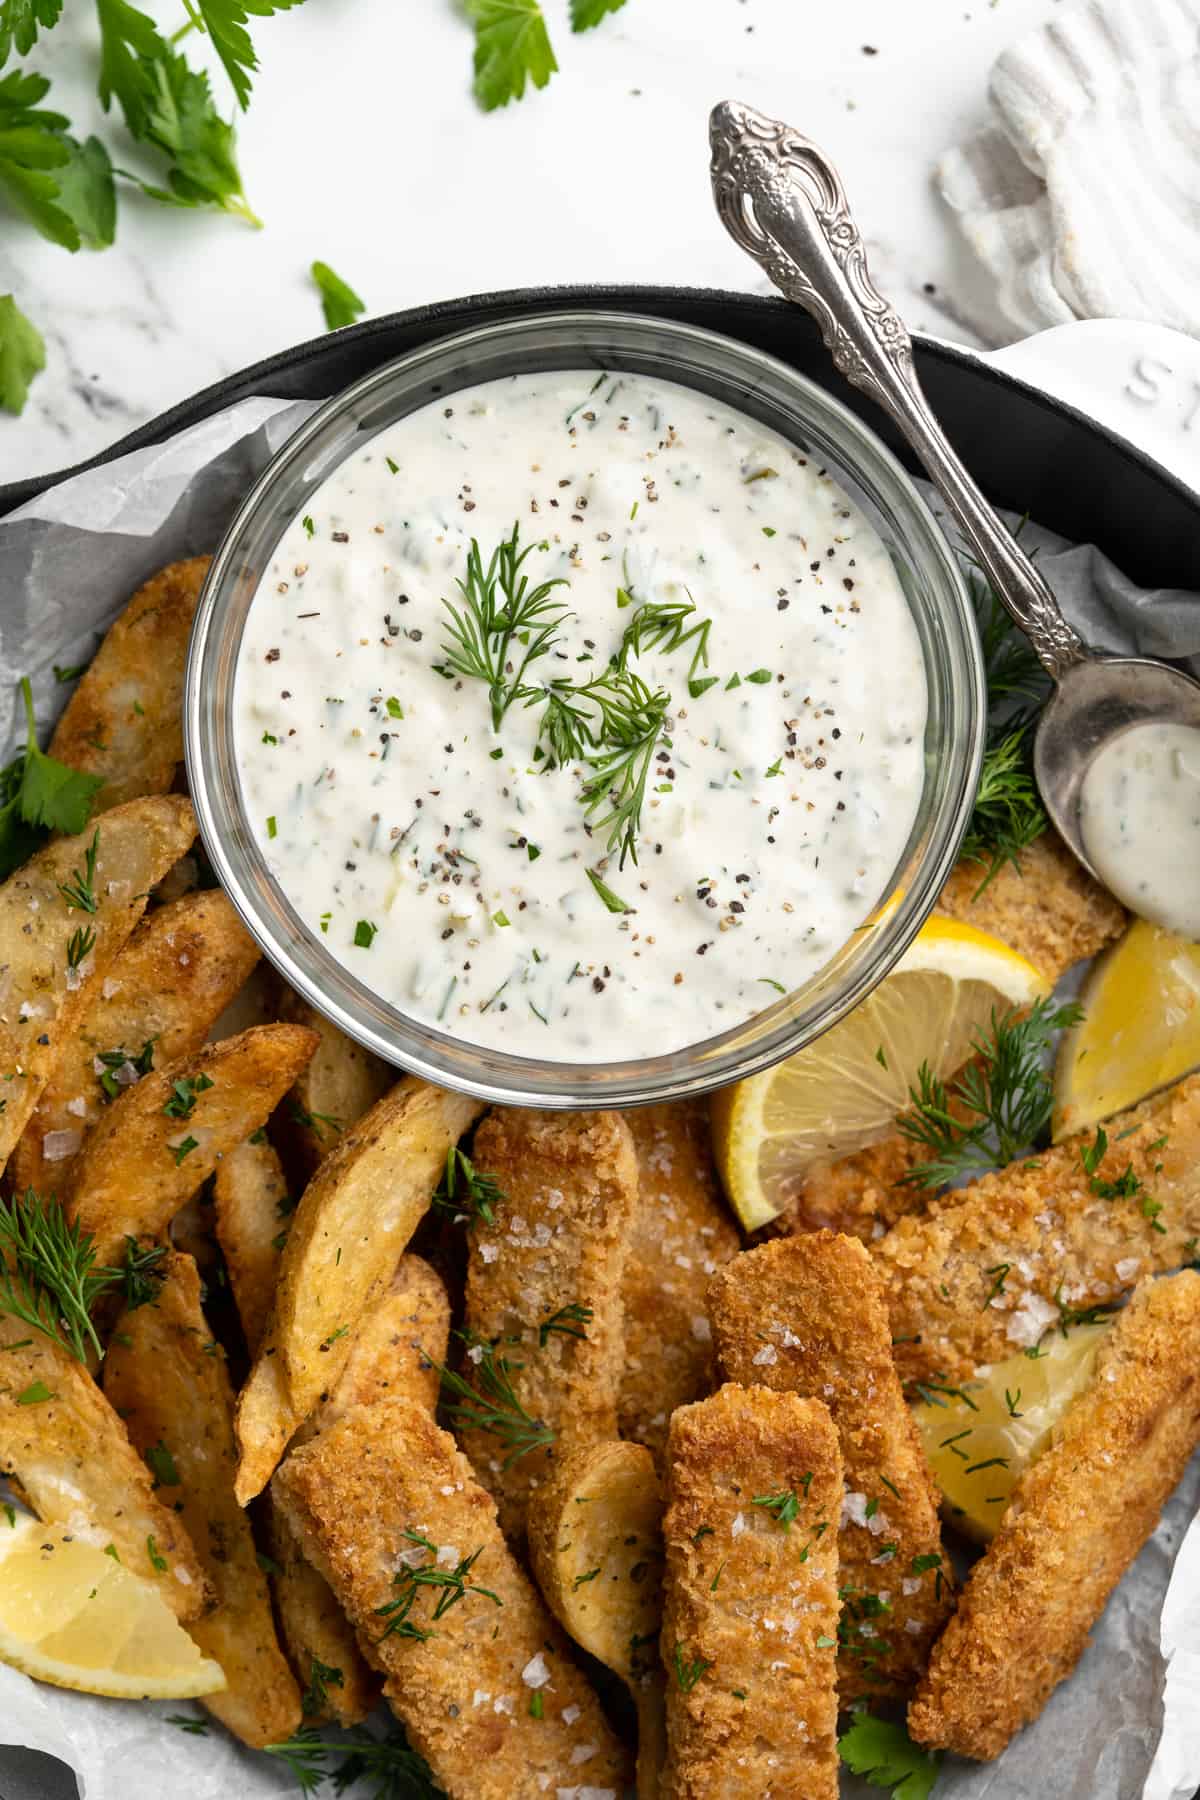 Overhead view of vegan tartar sauce in bowl with vegan fish and chips